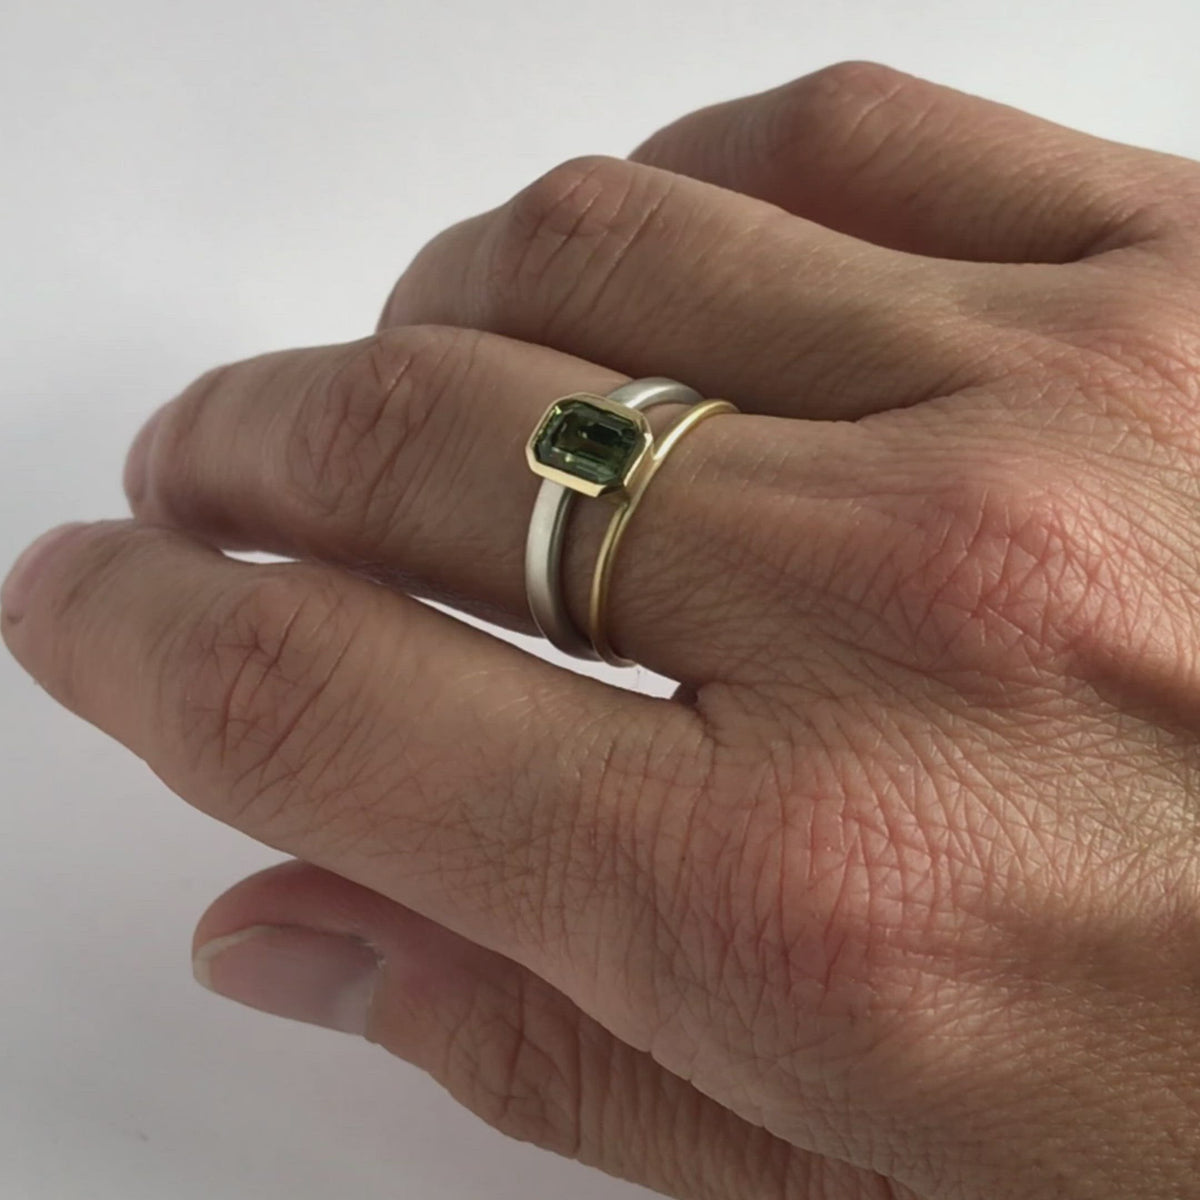 Octagonal-green-sapphire-two-tone-dress-ring-silver-gold-contemporary